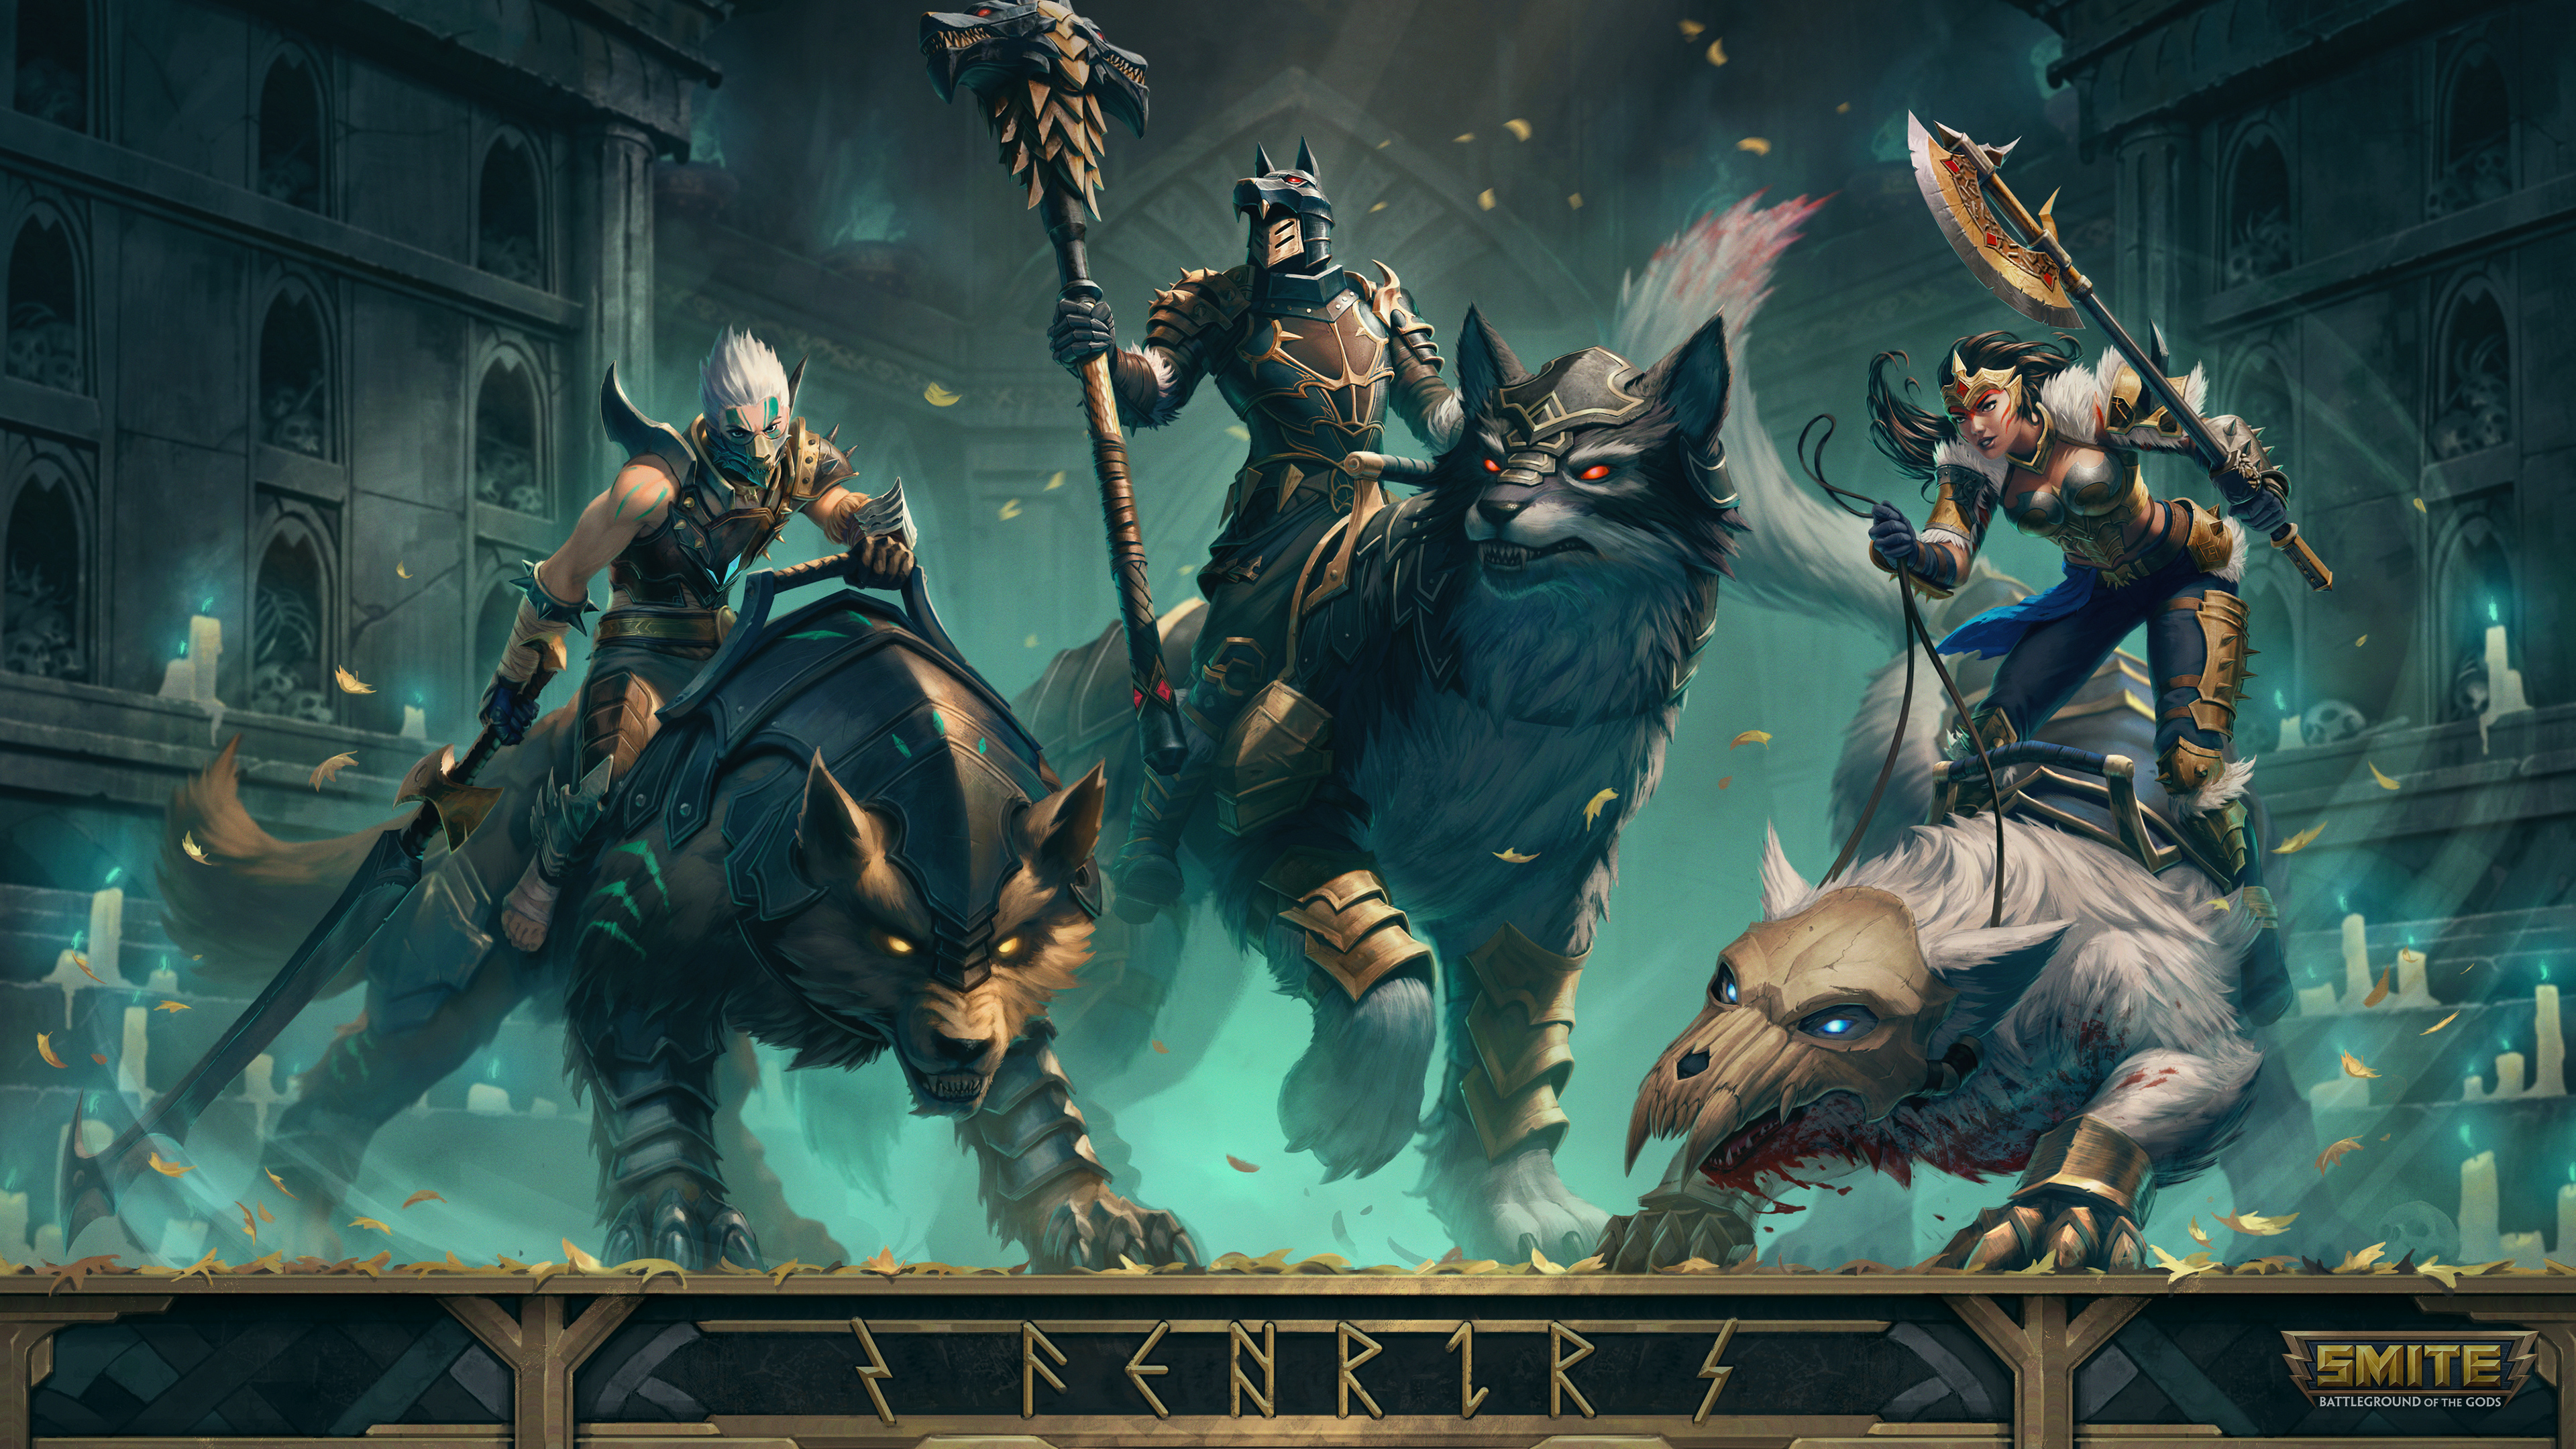 General 3840x2160 Smite MOBA video game characters video game art video games building animals armor weapon leaves axes video game boys video game girls glowing eyes Fenrir (Smite)